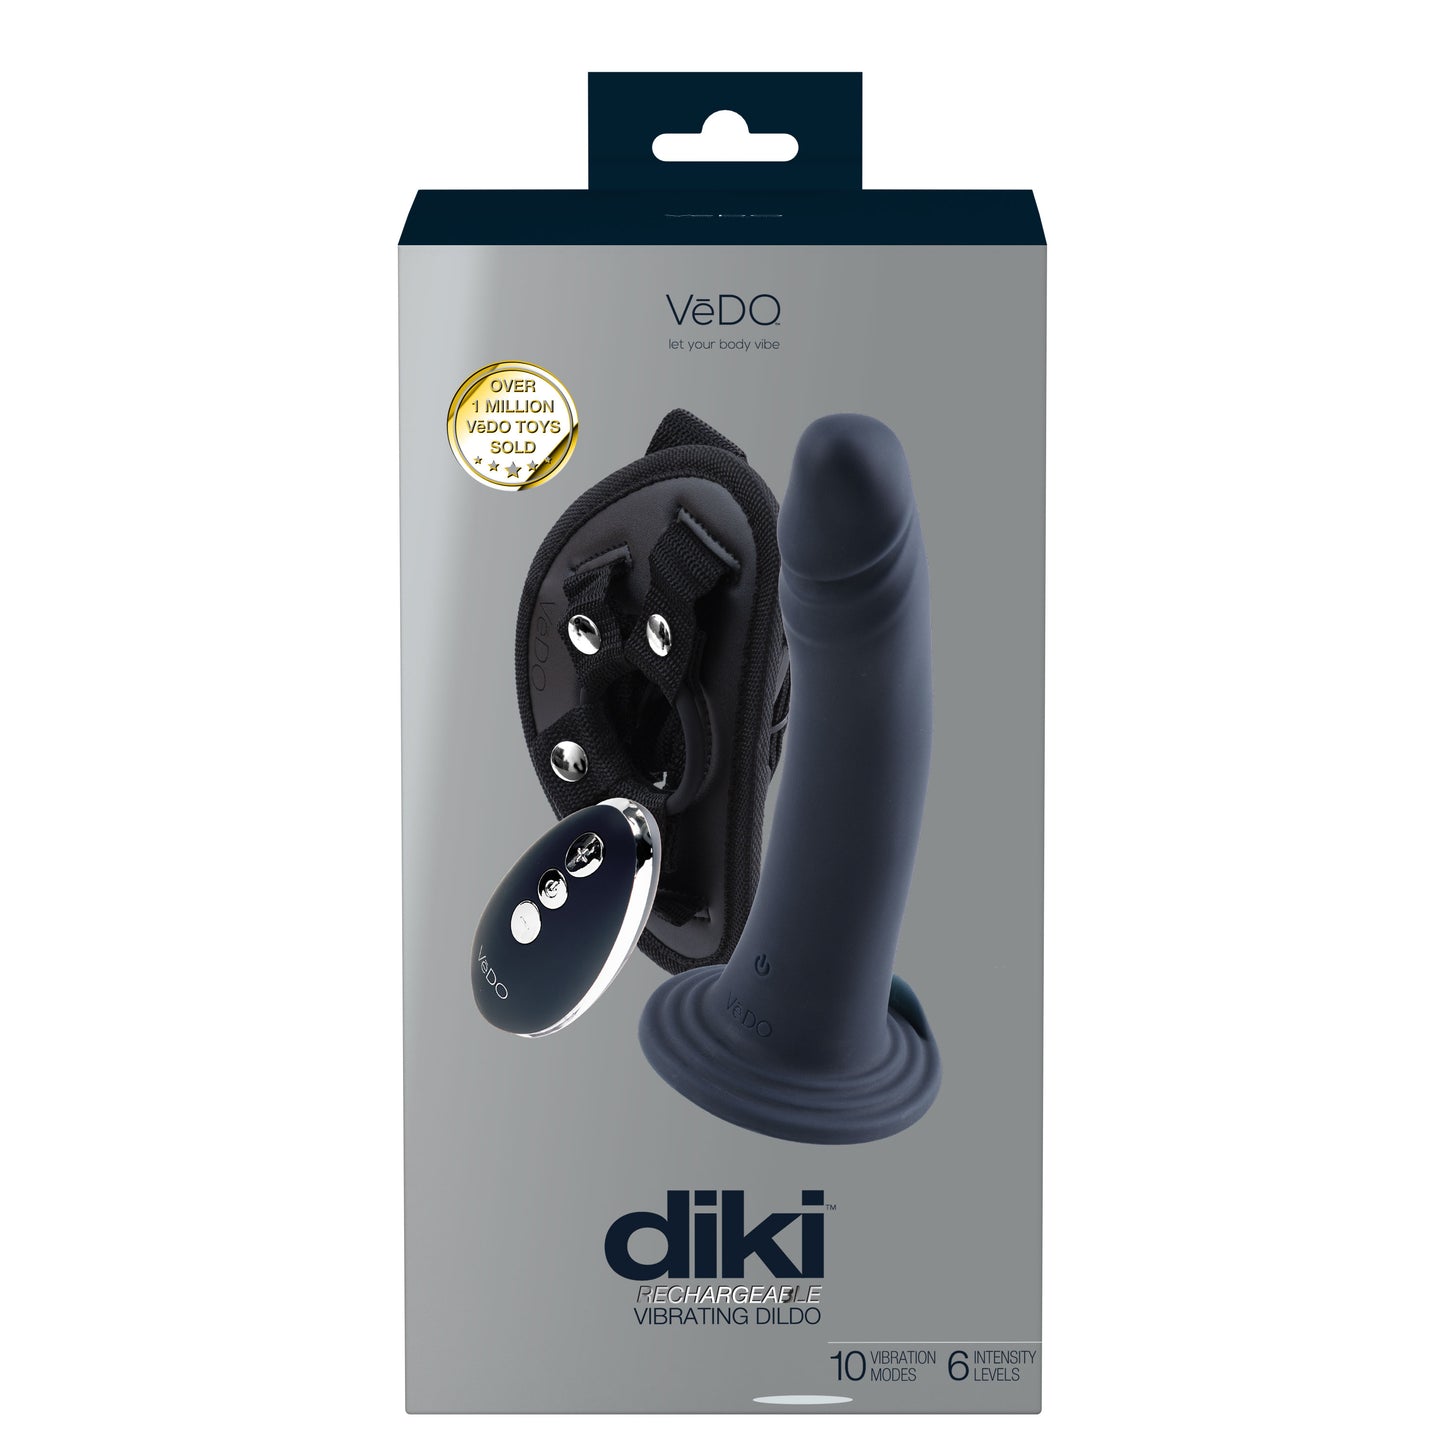 Diki Rechargeable Vibrating Dildo With Harness - Just Black VI-L0208